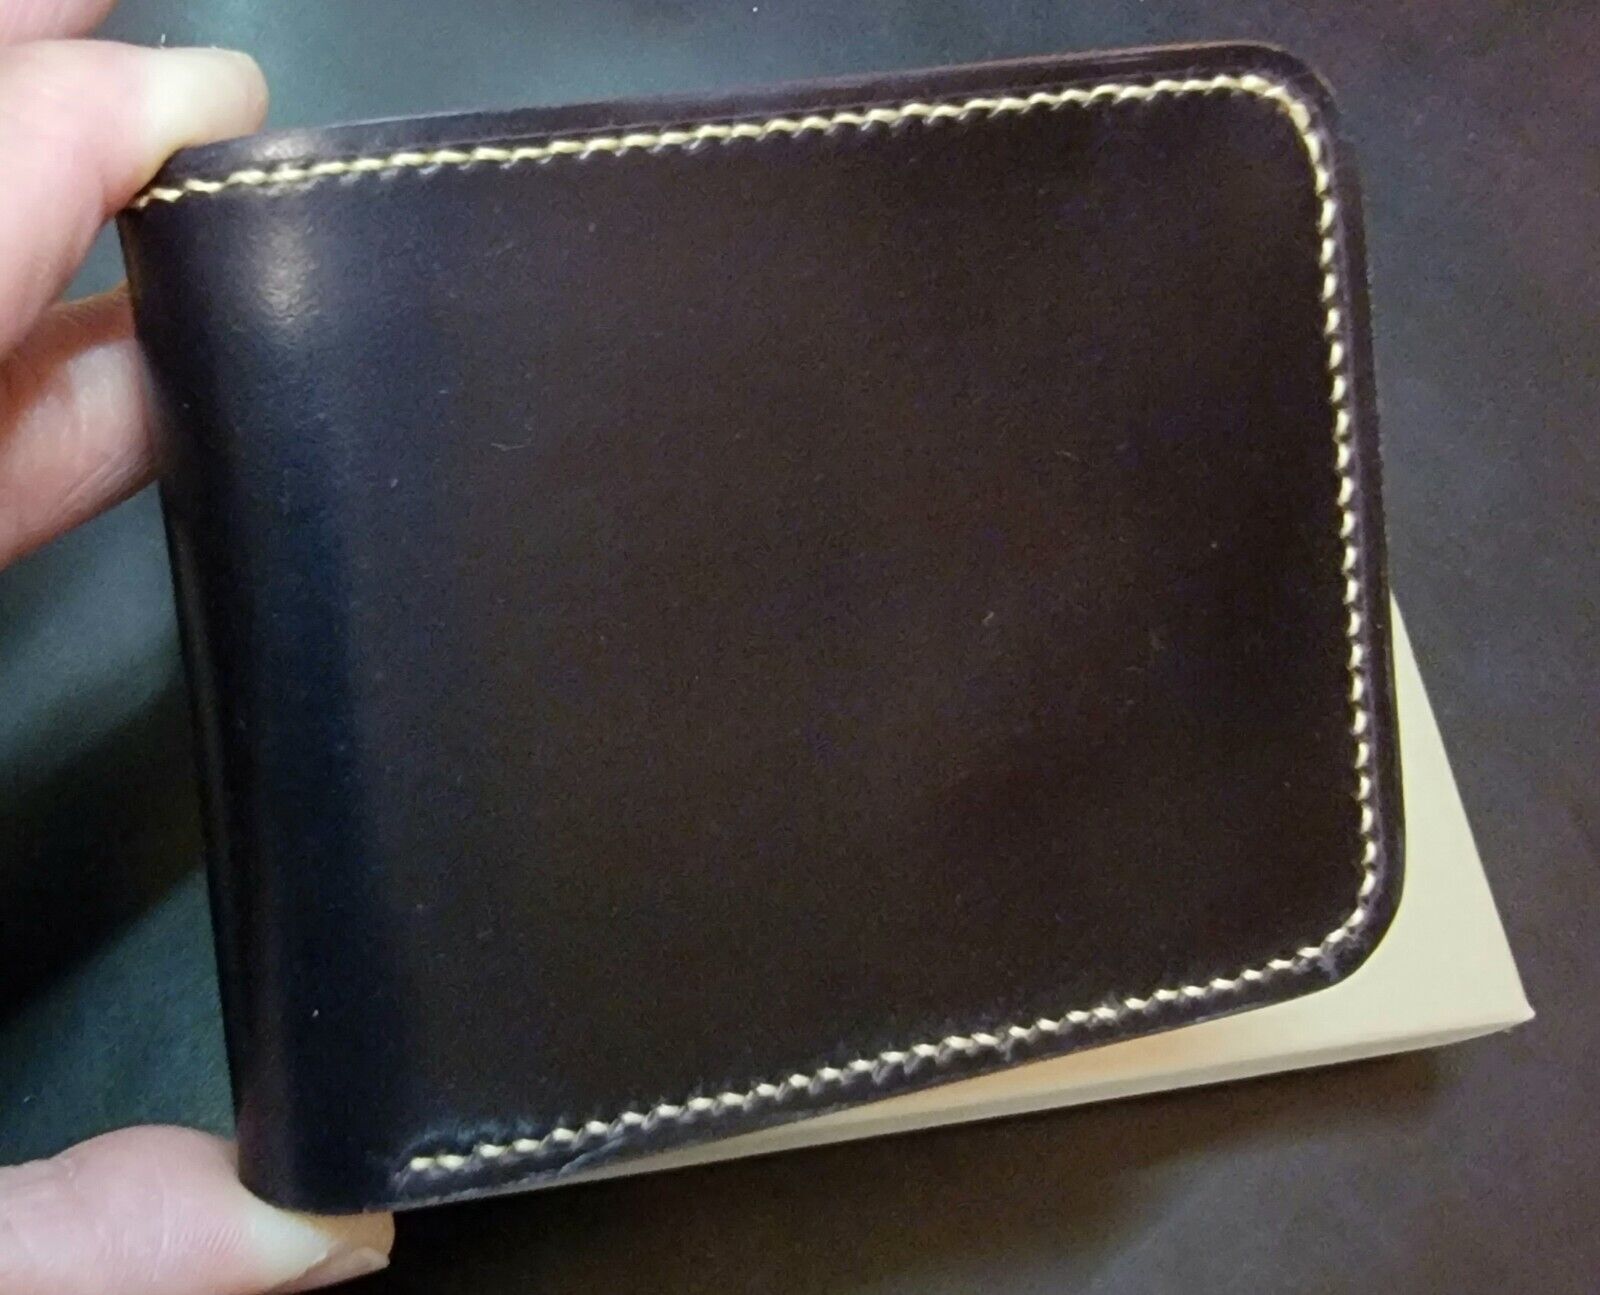 Horween Shell Cordovan Leather Bi-Fold Wallet Color eBay